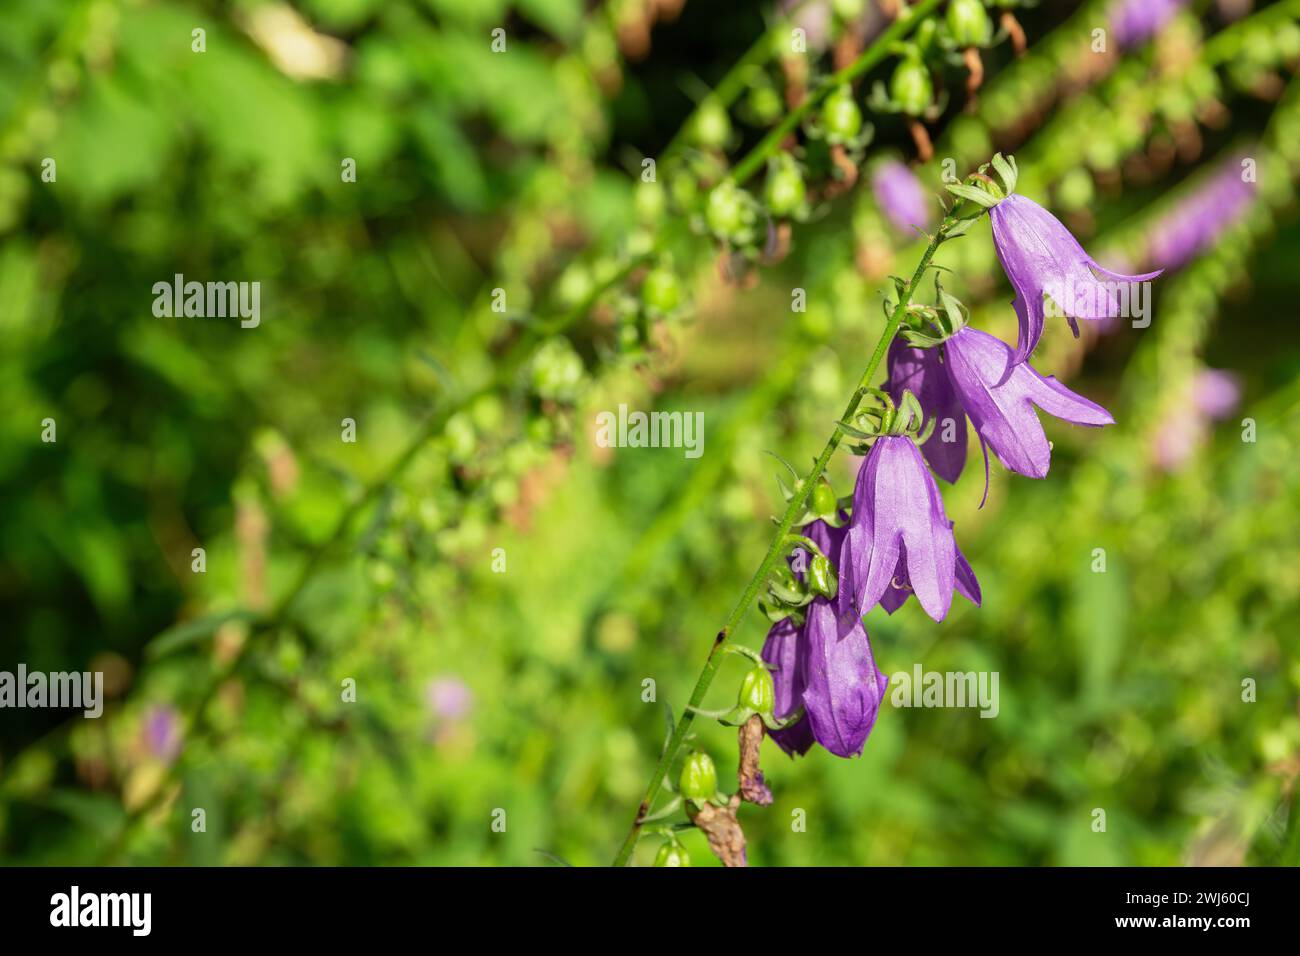 Many purple bellflowers on stem against blurry nature background, Campanula rapunculoides flowers Stock Photo